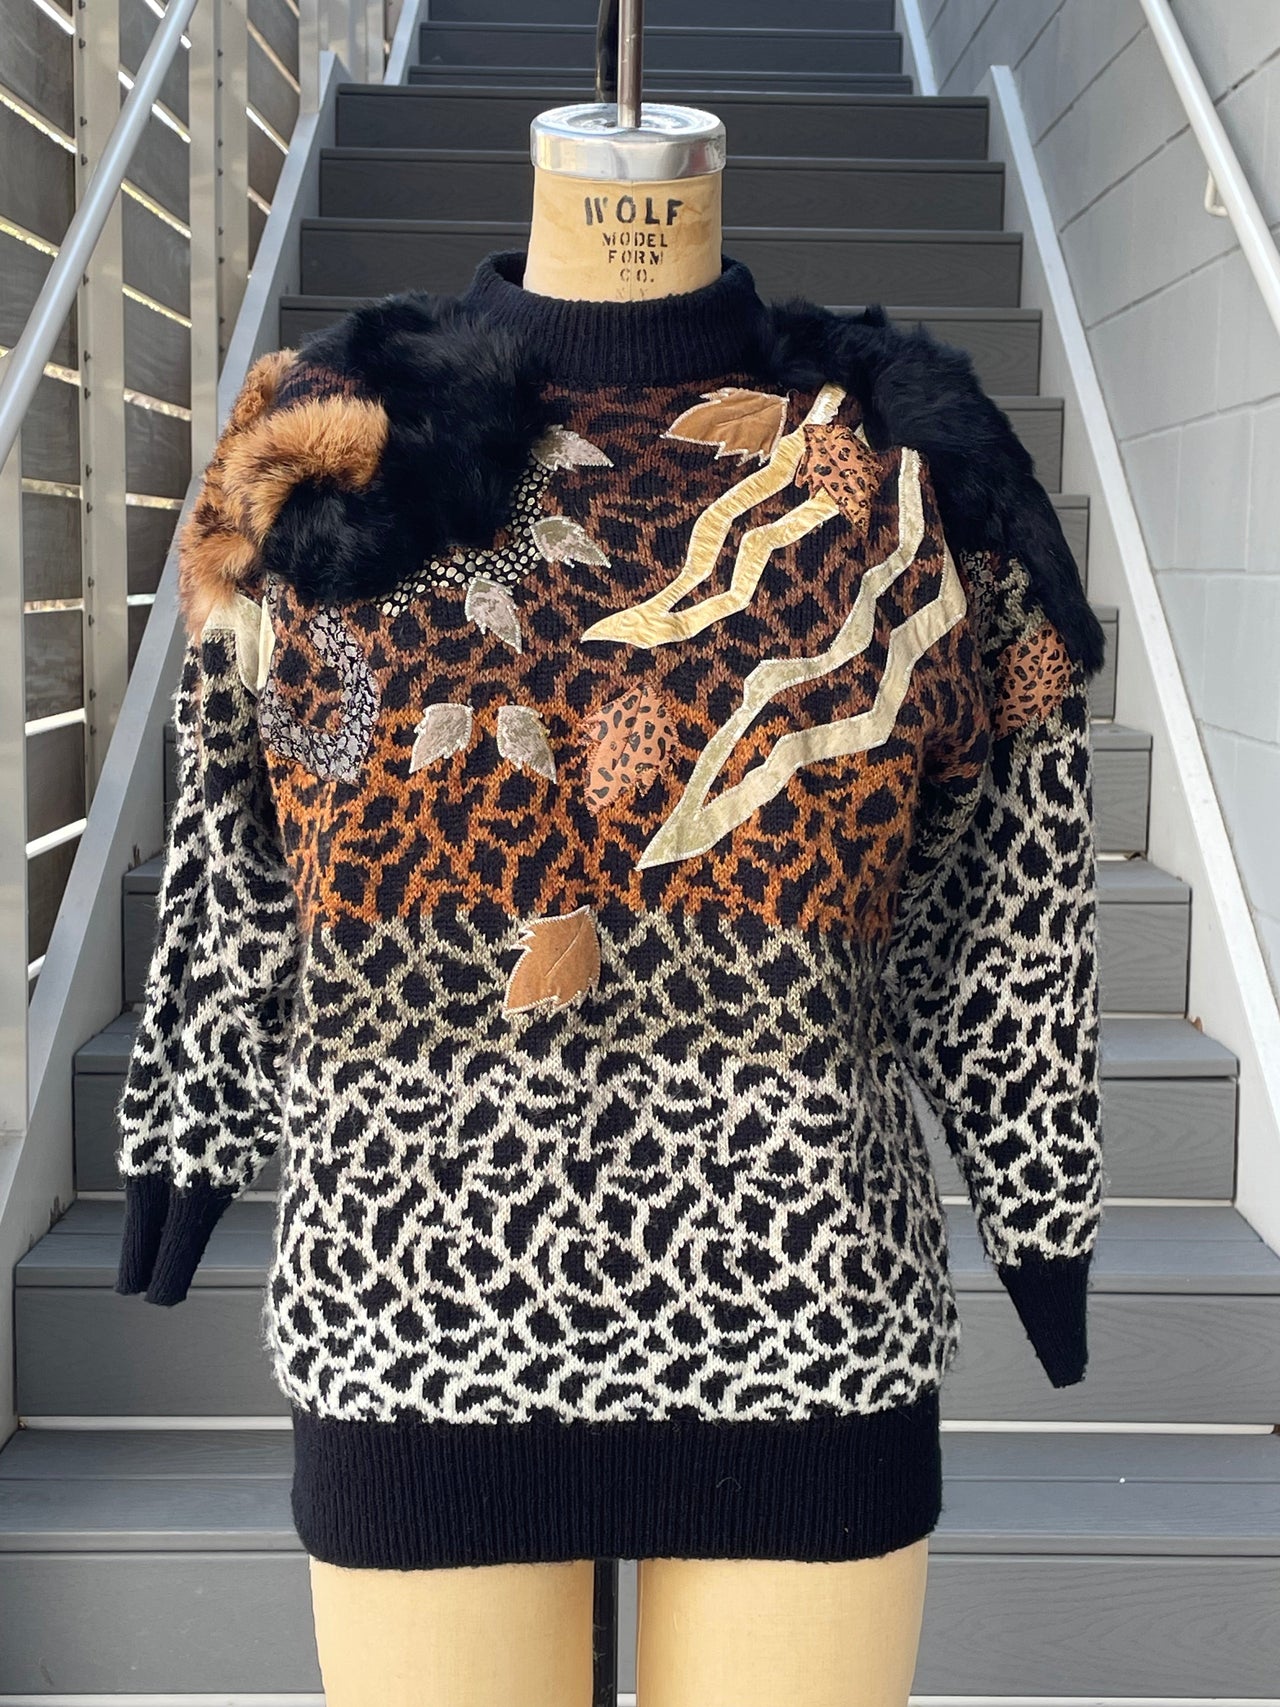 1980s Mariea Kim Animal Print Sweater with Faux Fur Accents Bloomers and Frocks 